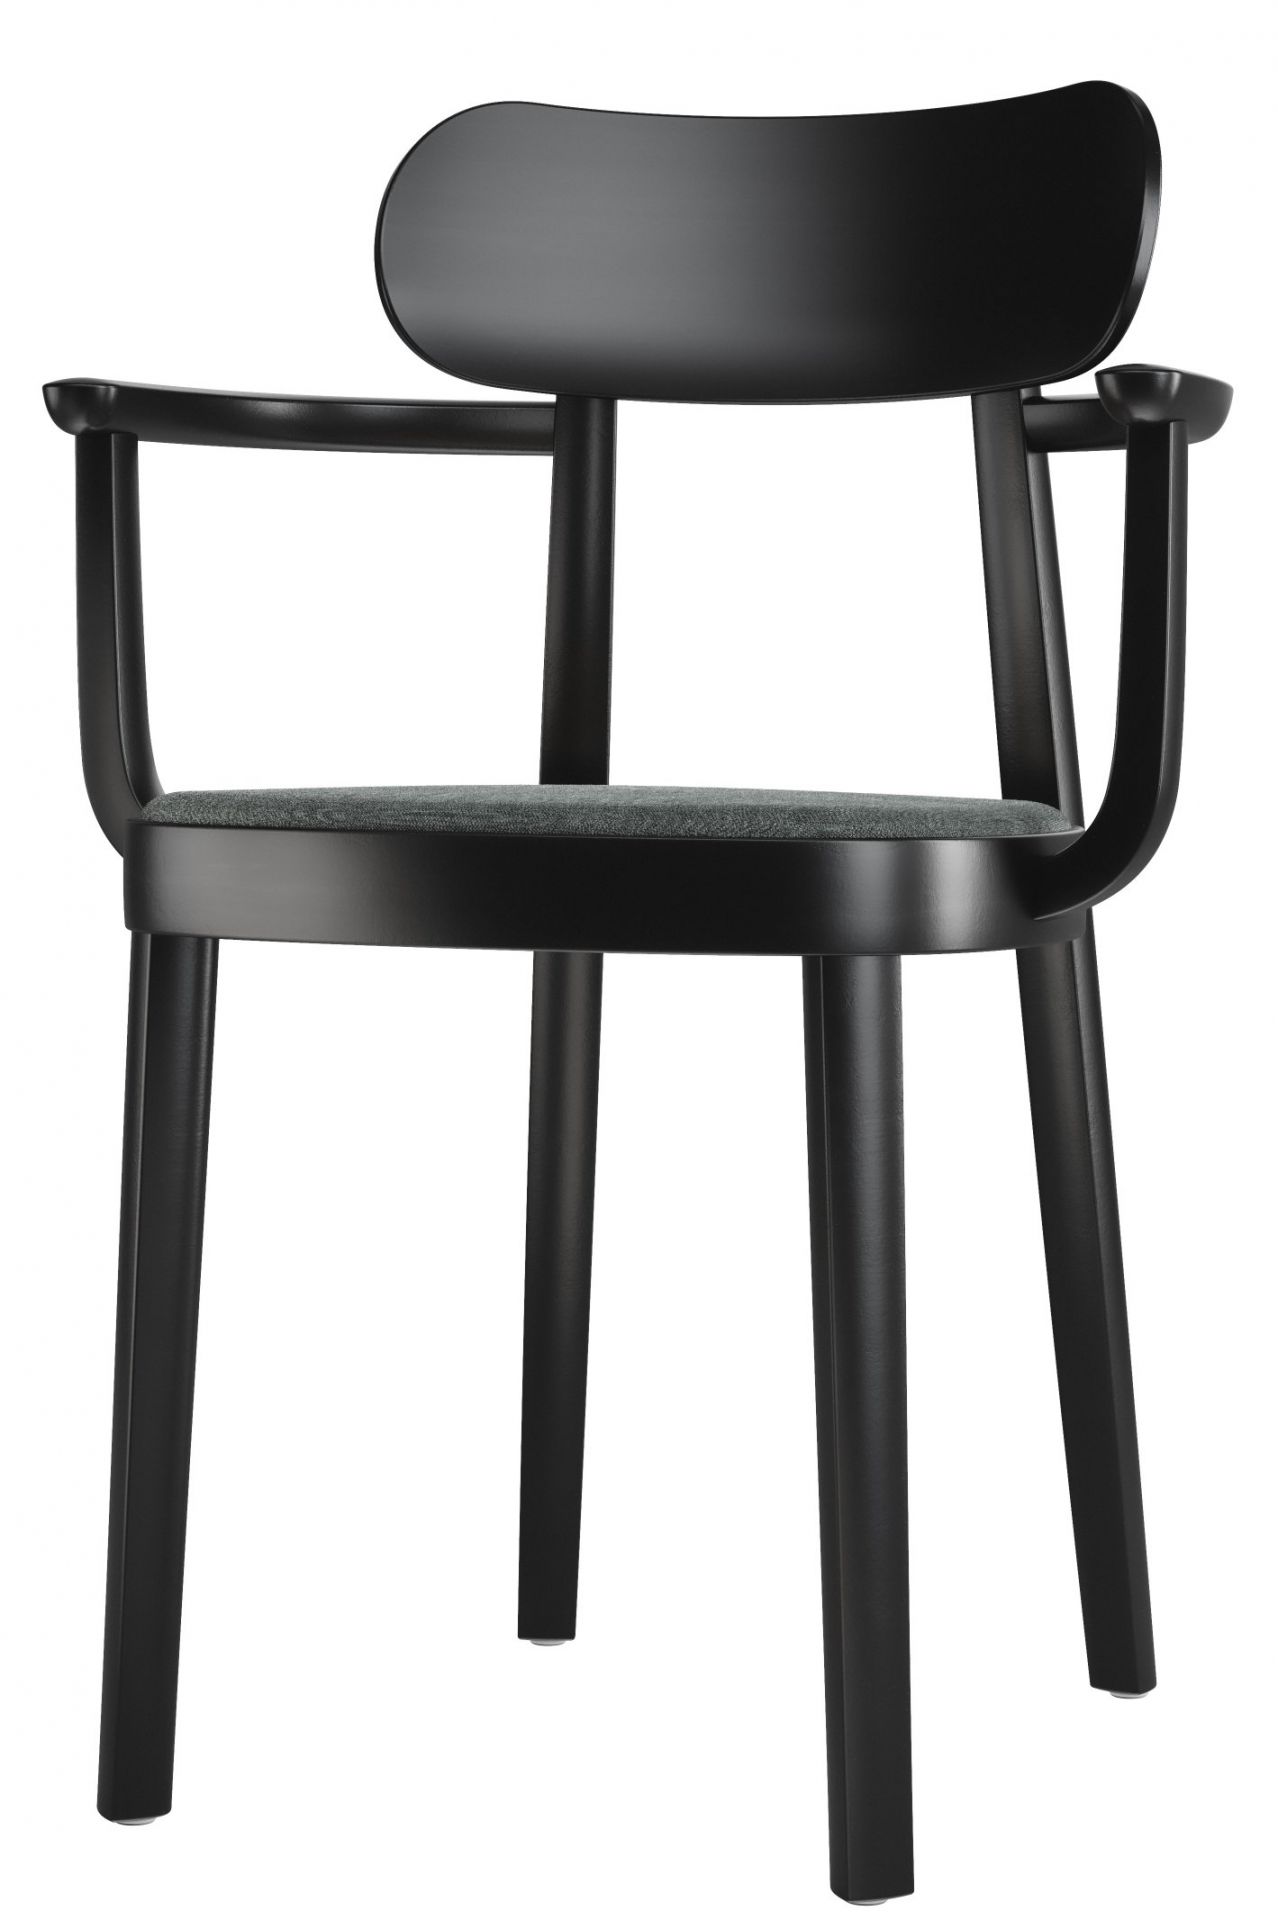 Wooden chair with Armrests 118SPF / 118 SPF Thonet